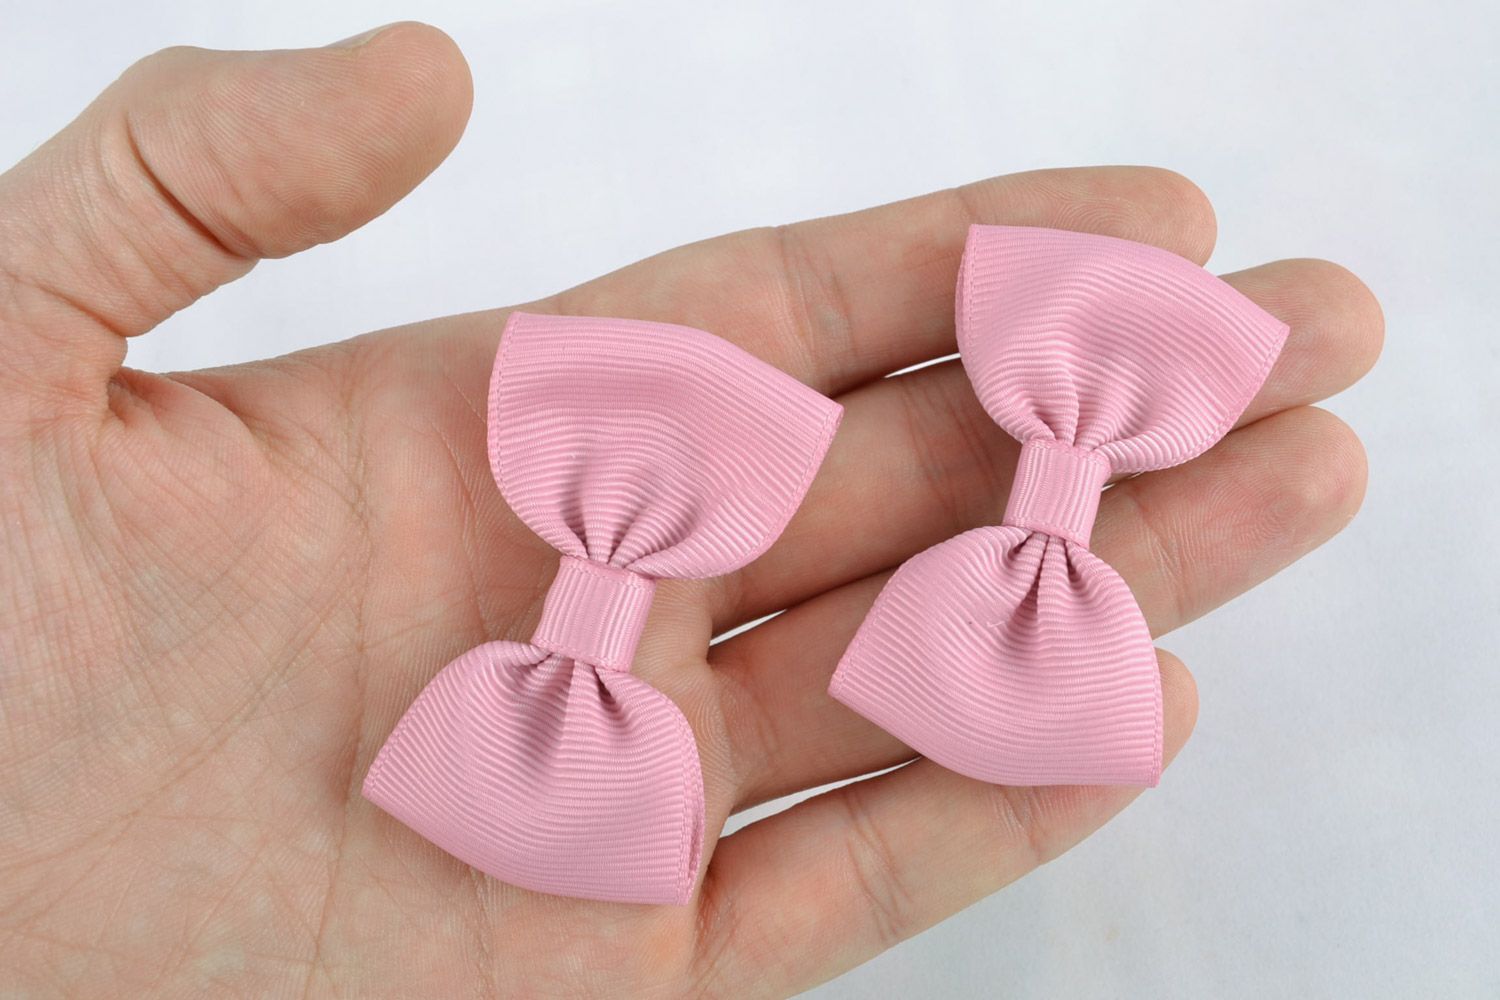 Handmade decorative hair clips with bows set of 2 pieces pink small hair accessories photo 2